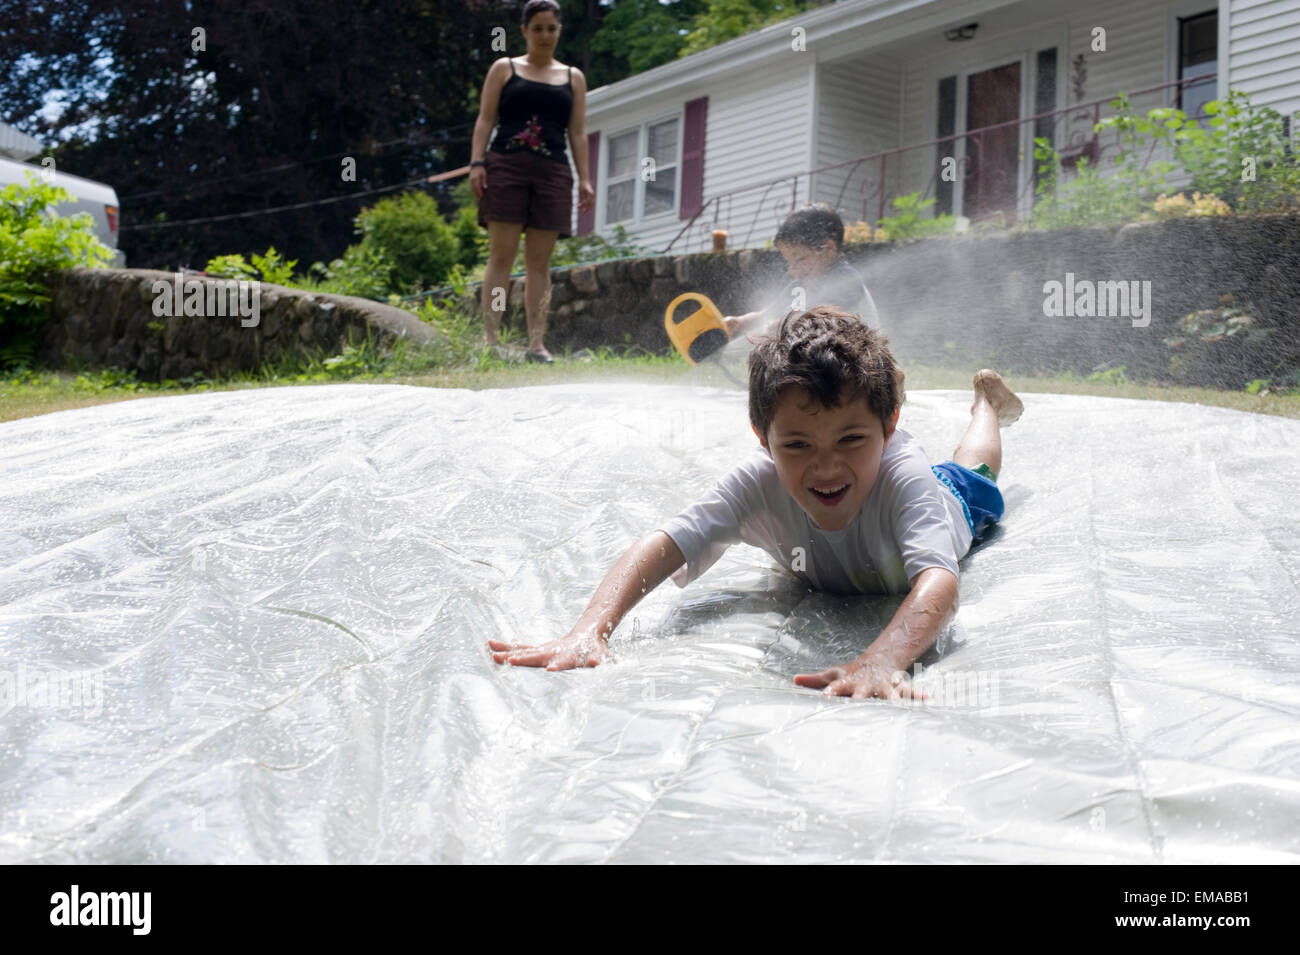 Seven year old boy plays on a homemade slip and slide in his backyard with his mother and 4 year old brother Stock Photo